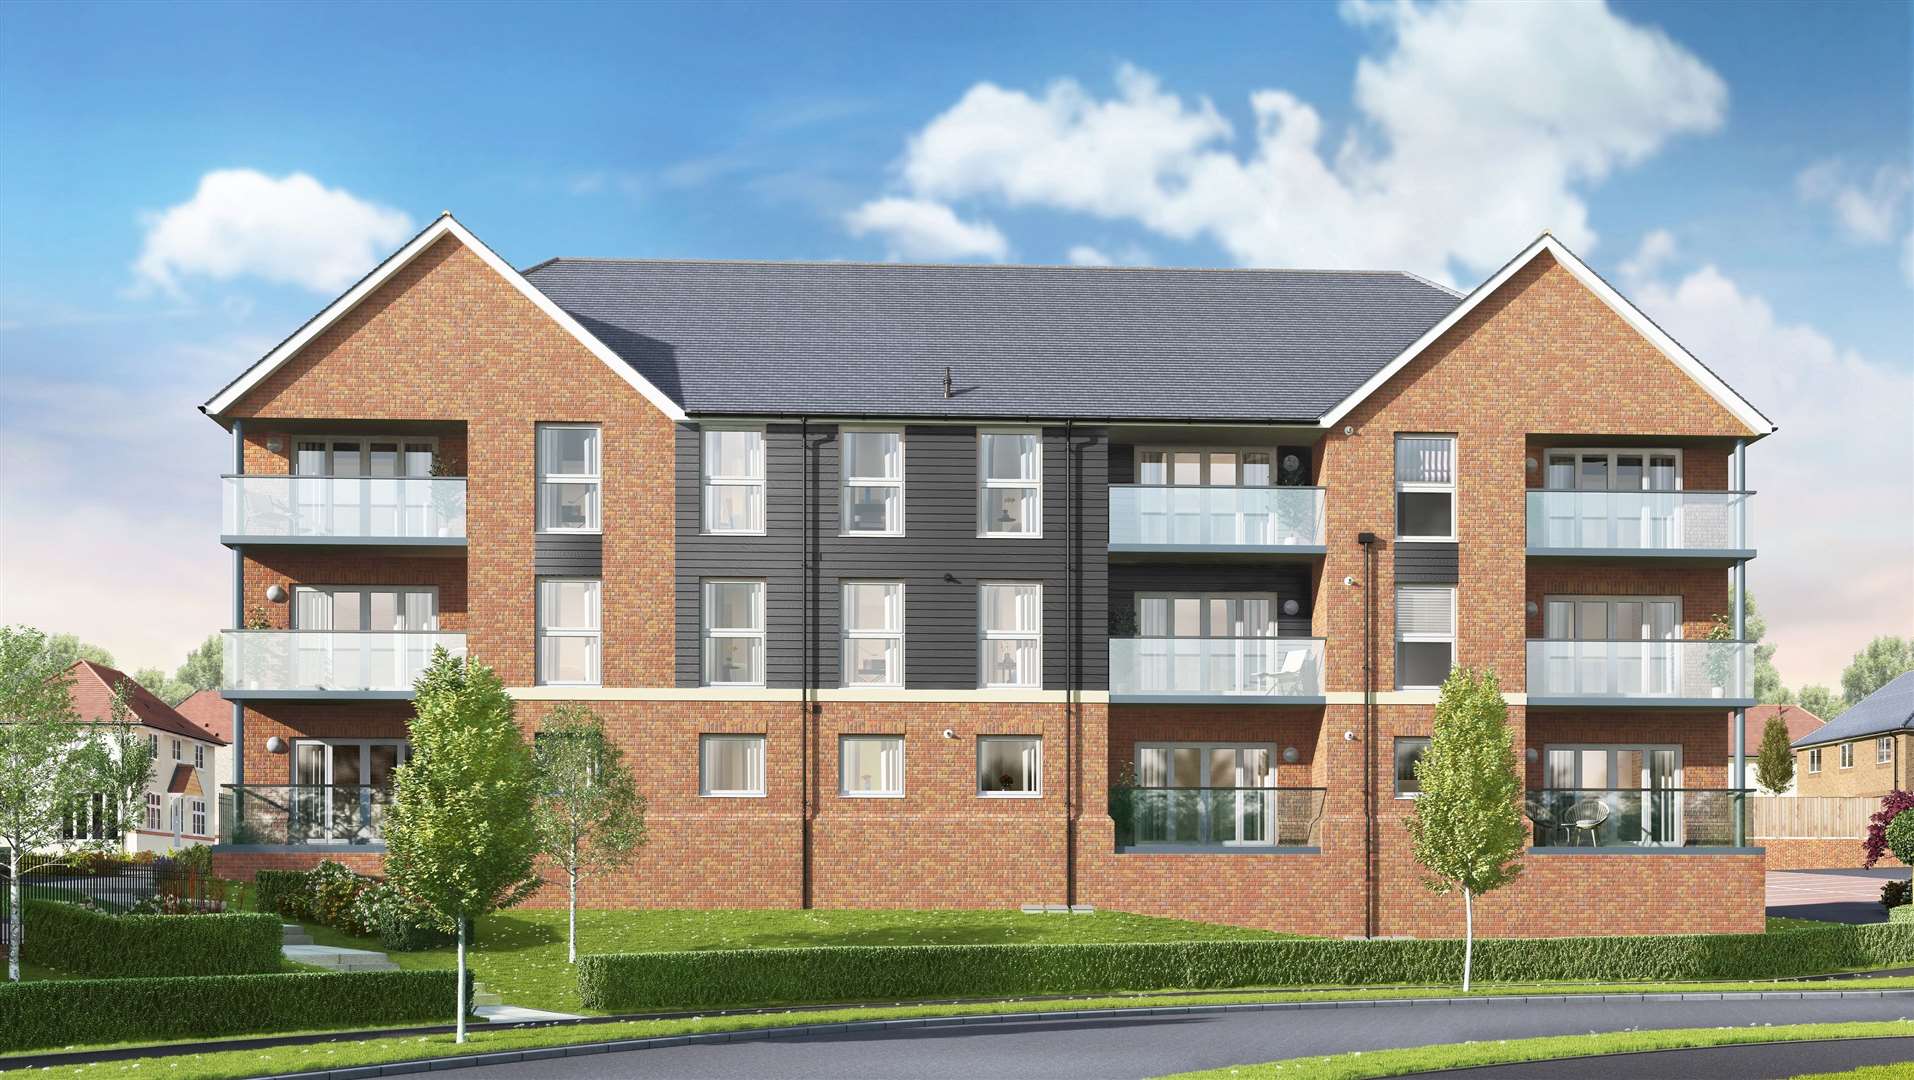 An exterior image of the new two-bedroom apartments to be featured in Ebbsfleet Place. (20394859)